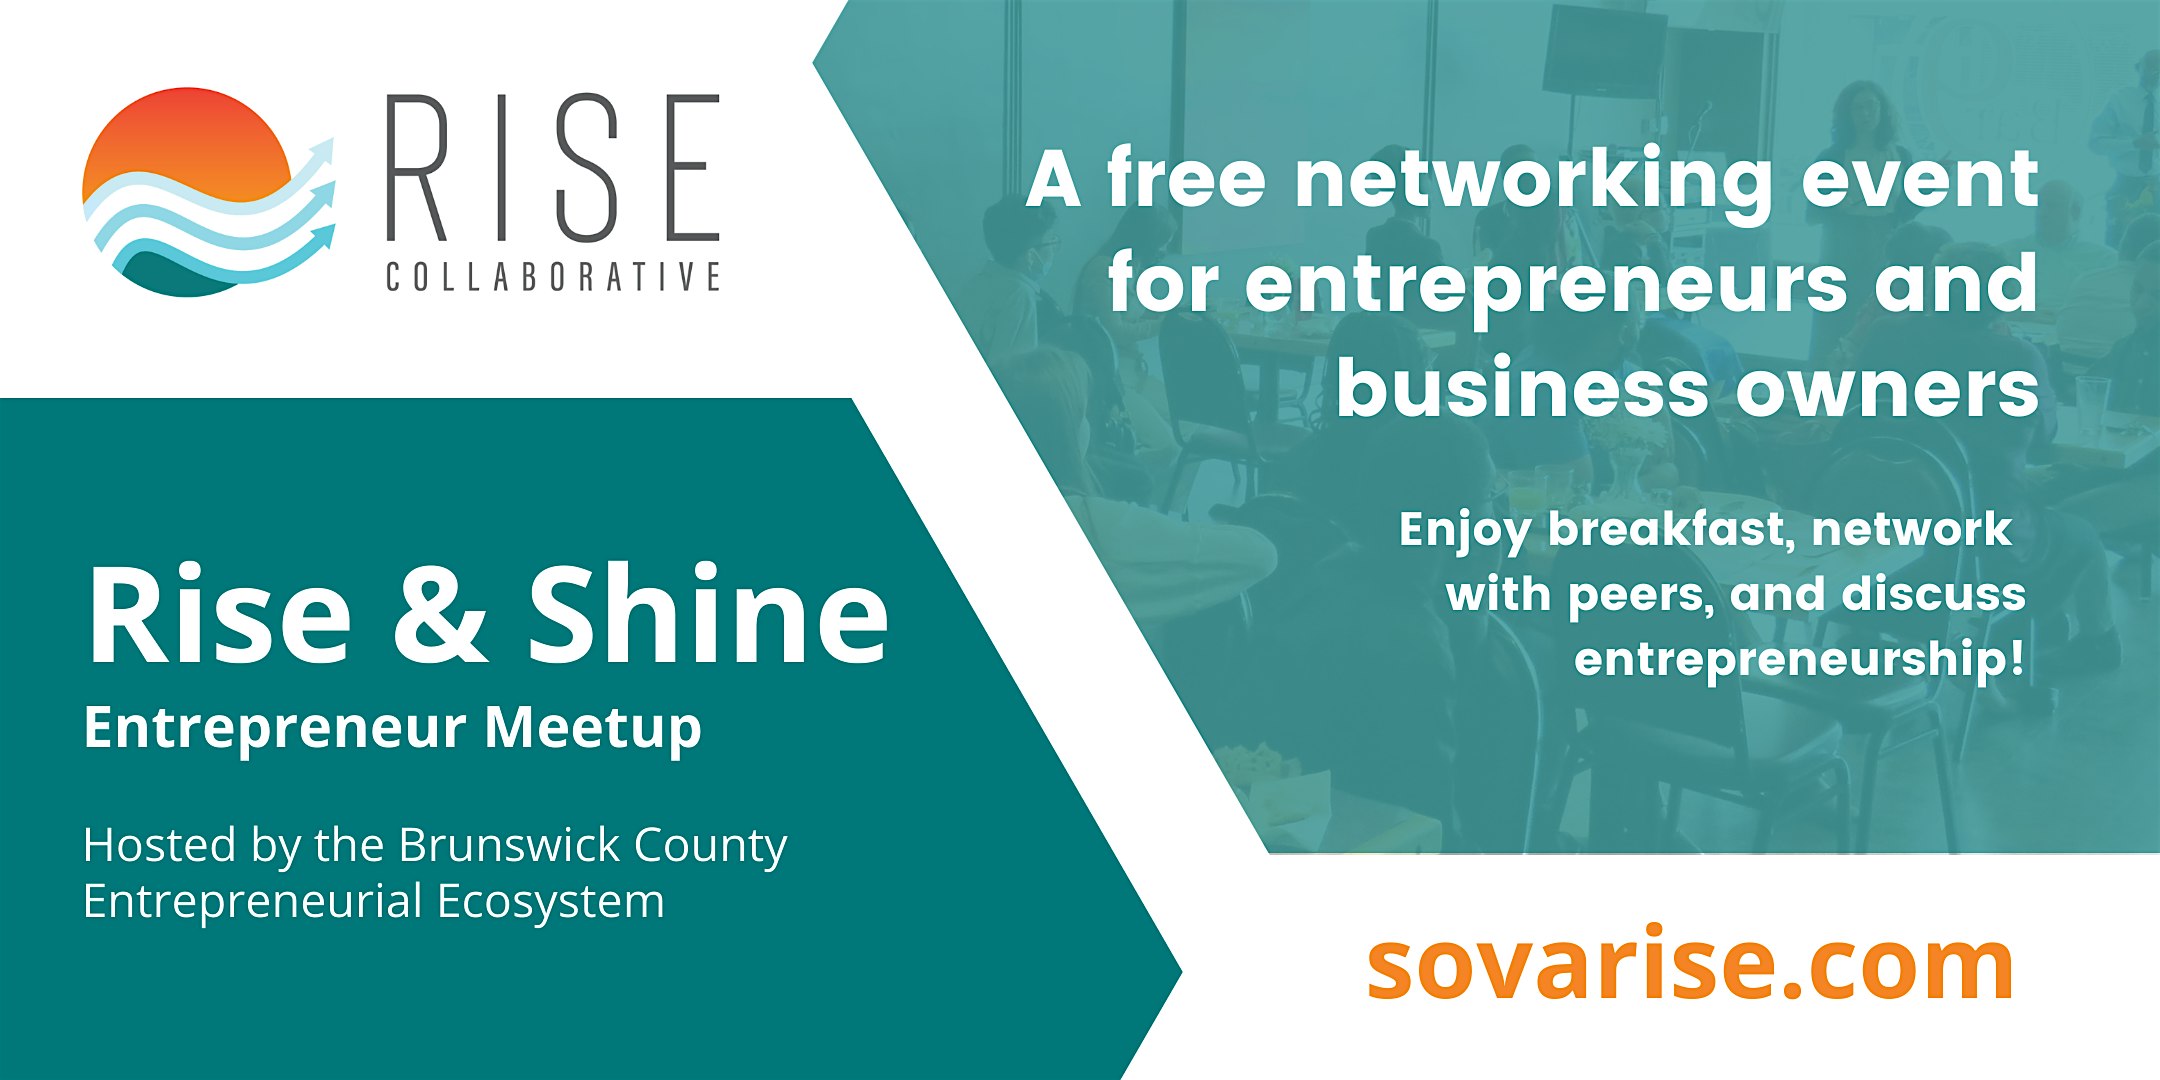 RISE & Shine Entrepreneur Meetup – Hosted by Brunswick County